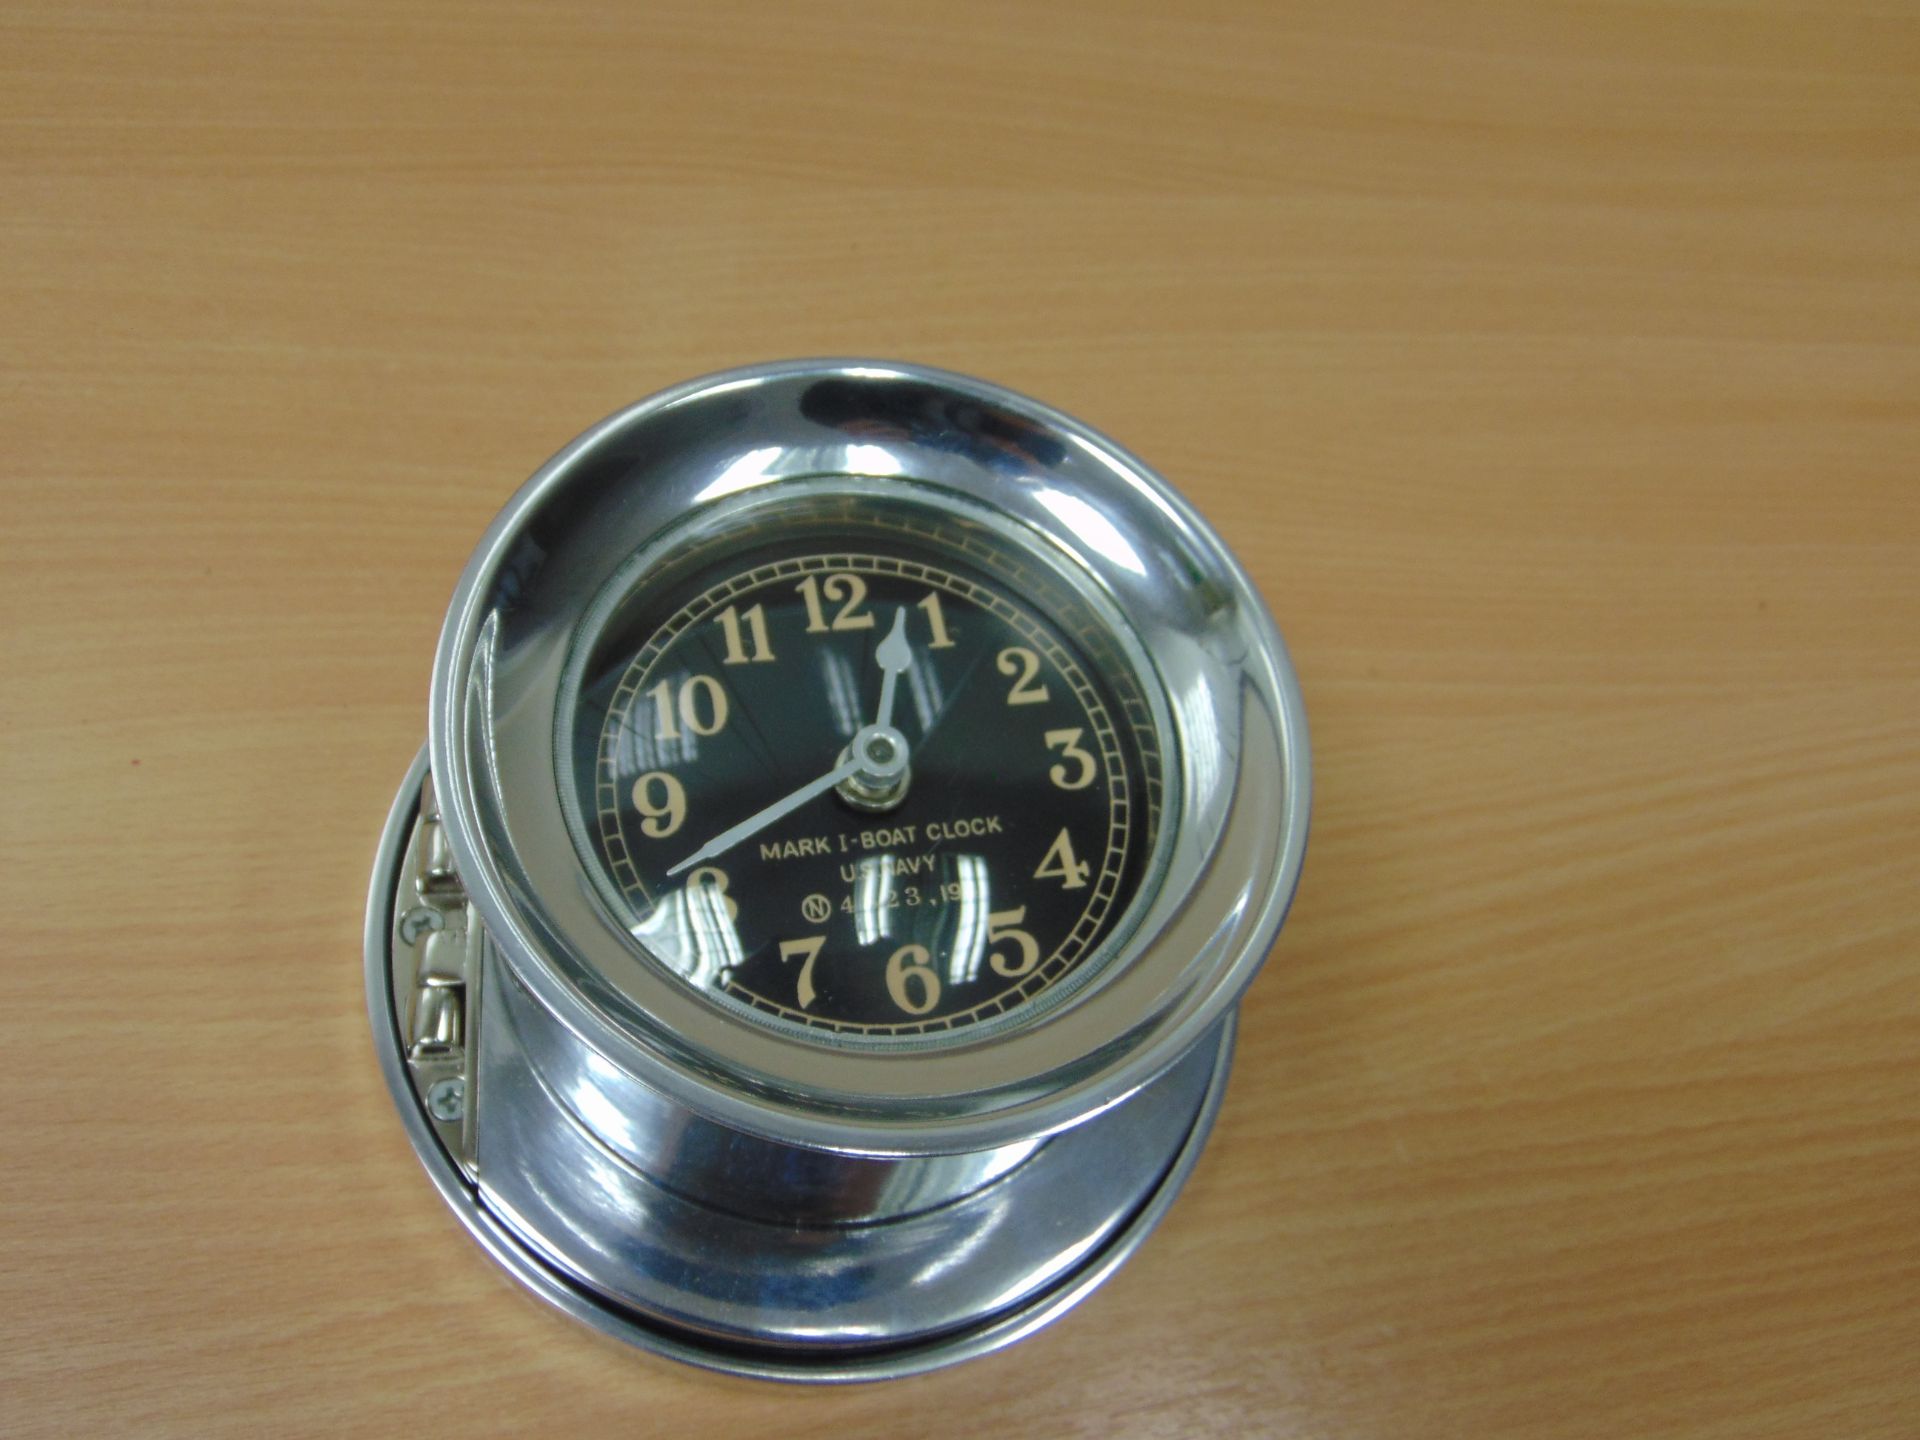 US NAVY WW2 MK1 BOAT CLOCK REPRO IN POLISHED ALLUMINUM WITH MOUNTING SCREW ETC. - Image 3 of 6